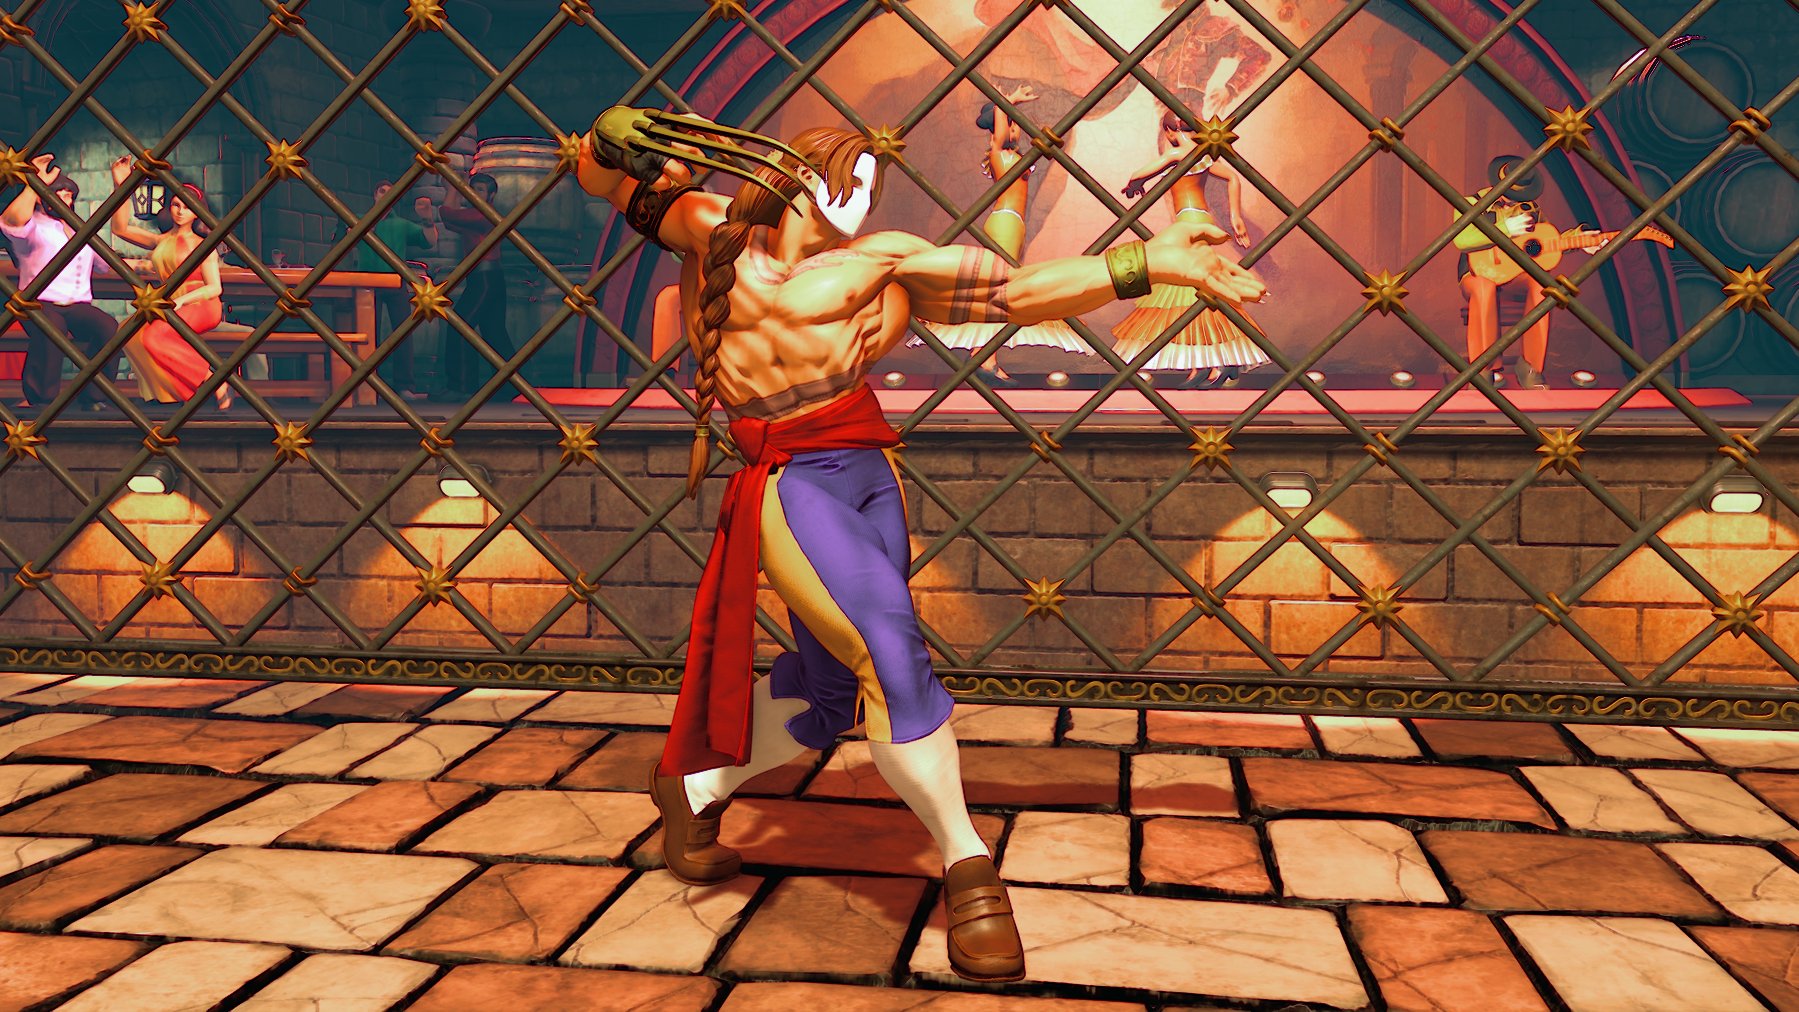 Street Fighter V Update Adds Vega Stage With Unique Character